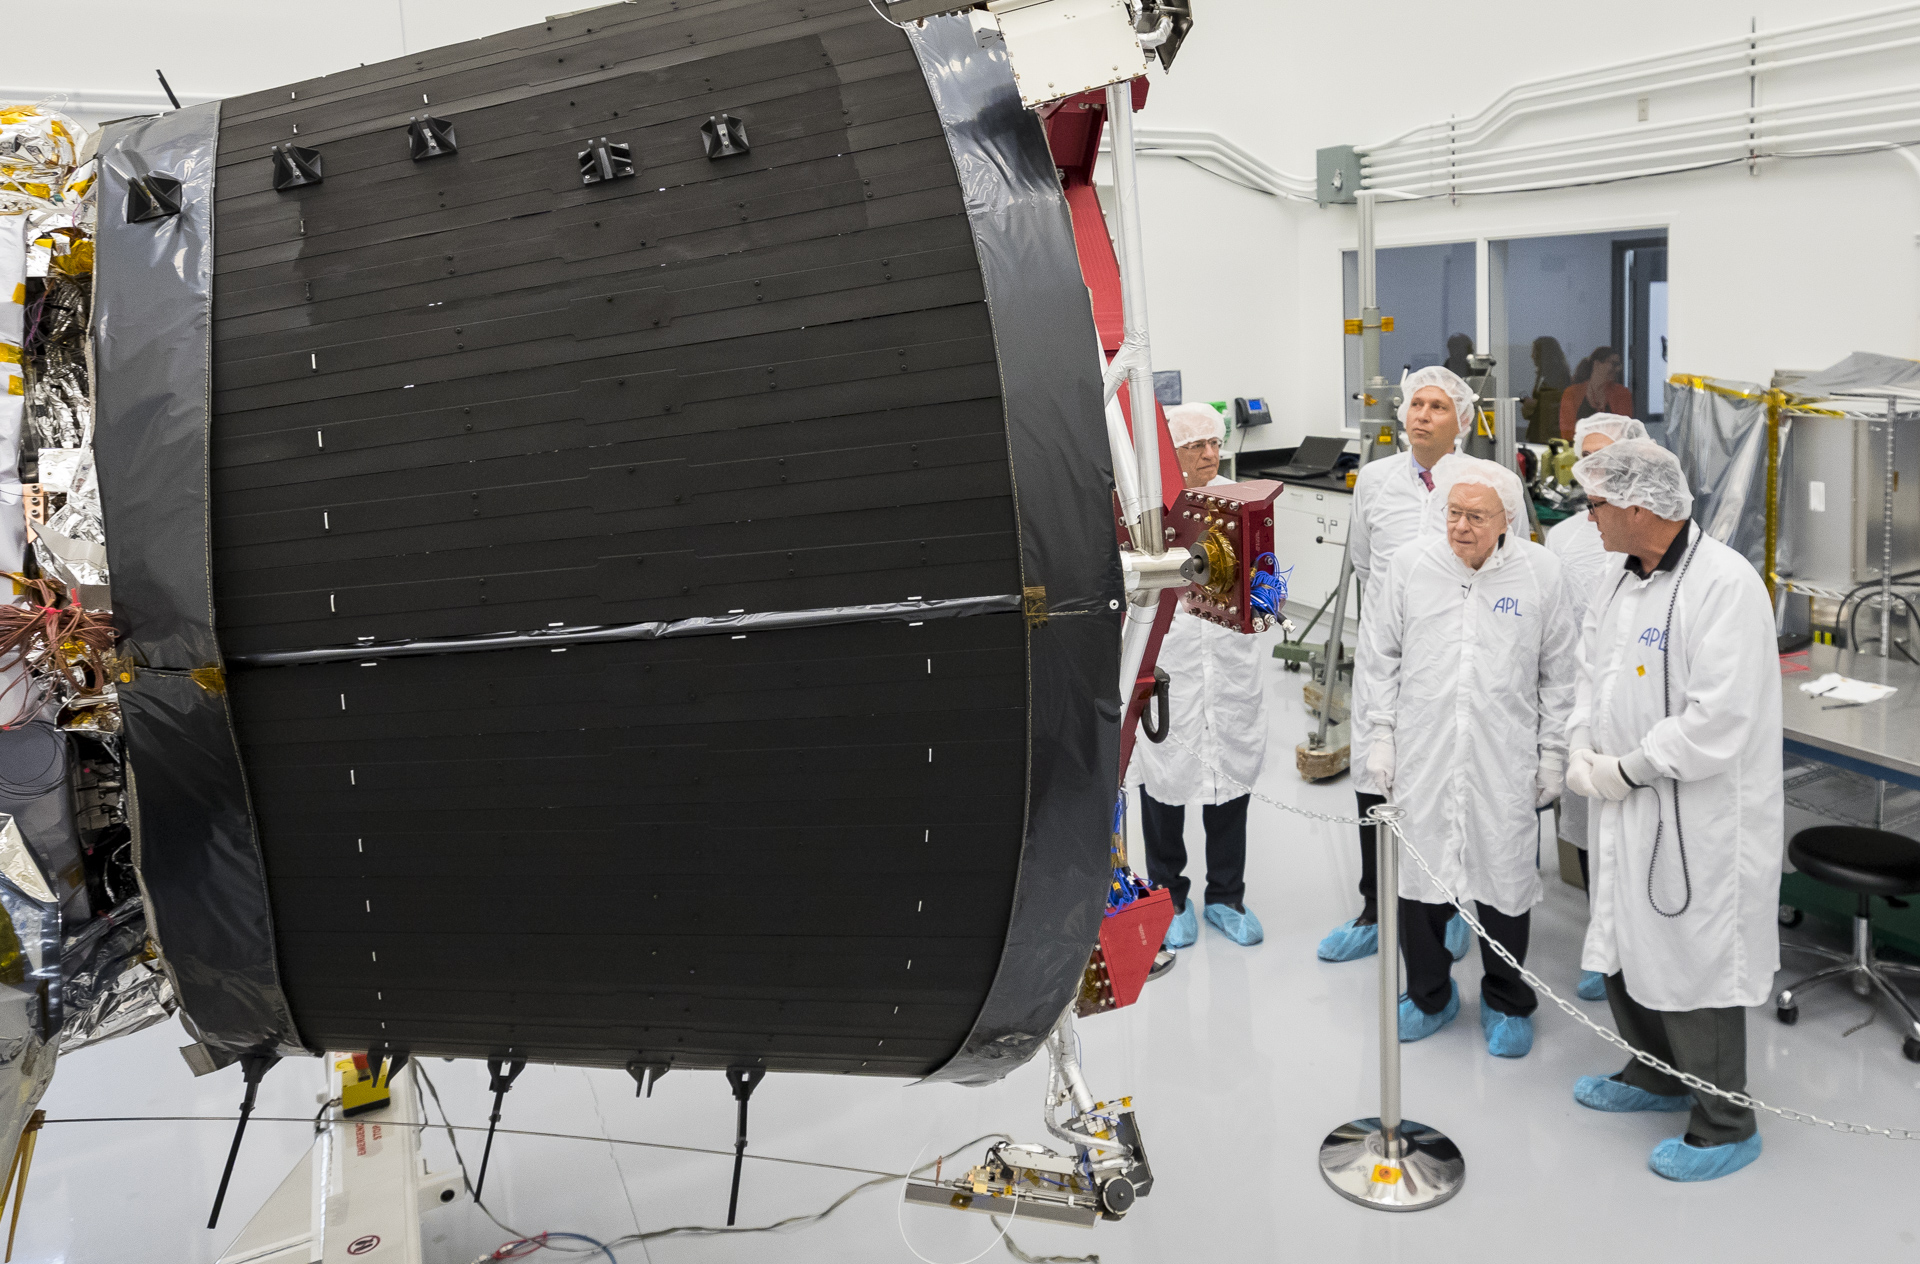 Eugene Parker, professor emeritus at the University of Chicago, visits the spacecraft that bears his name, NASA’s Parker Solar Probe, at the Johns Hopkins Applied Physics Laboratory in Laurel, Maryland, where the probe was designed and is being built. The large black structure is one of the spacecraft's massive cooling radiators. The spacecraft is humanity’s first mission to a star – it will travel directly through the Sun’s atmosphere.  